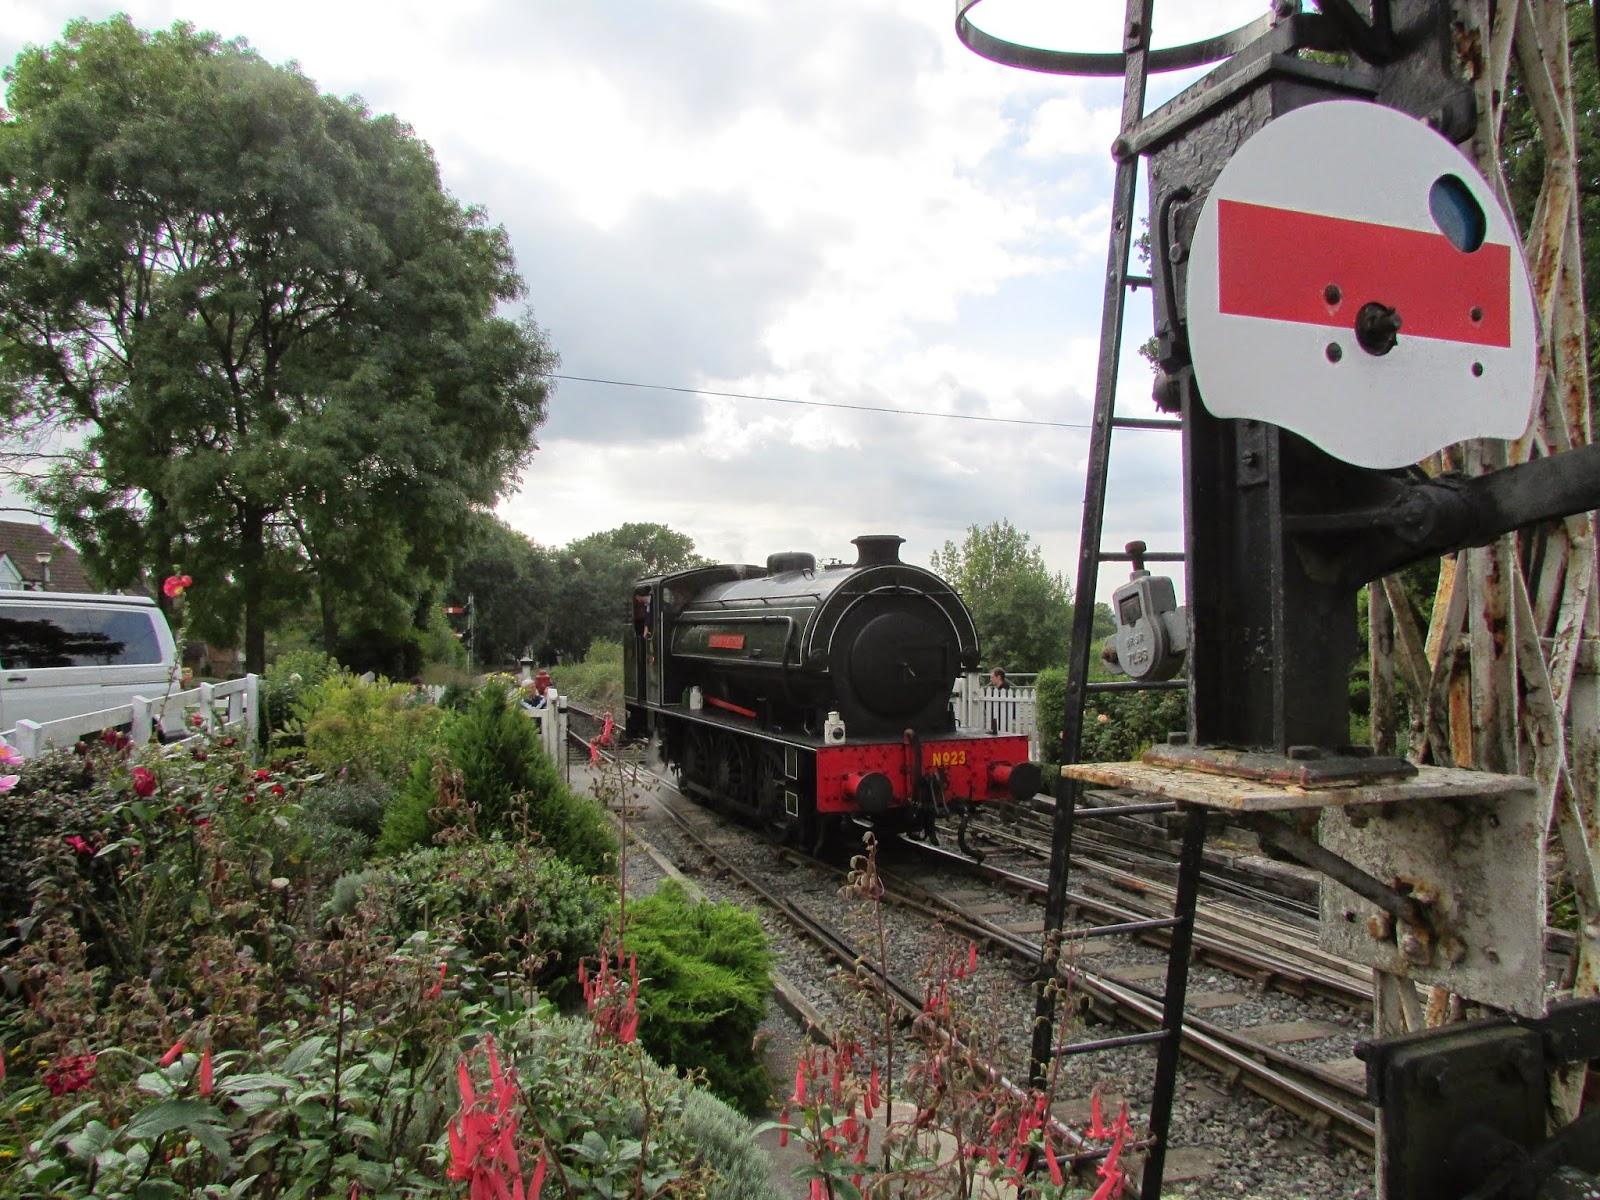 About Angie: The Kent & East Sussex Railway